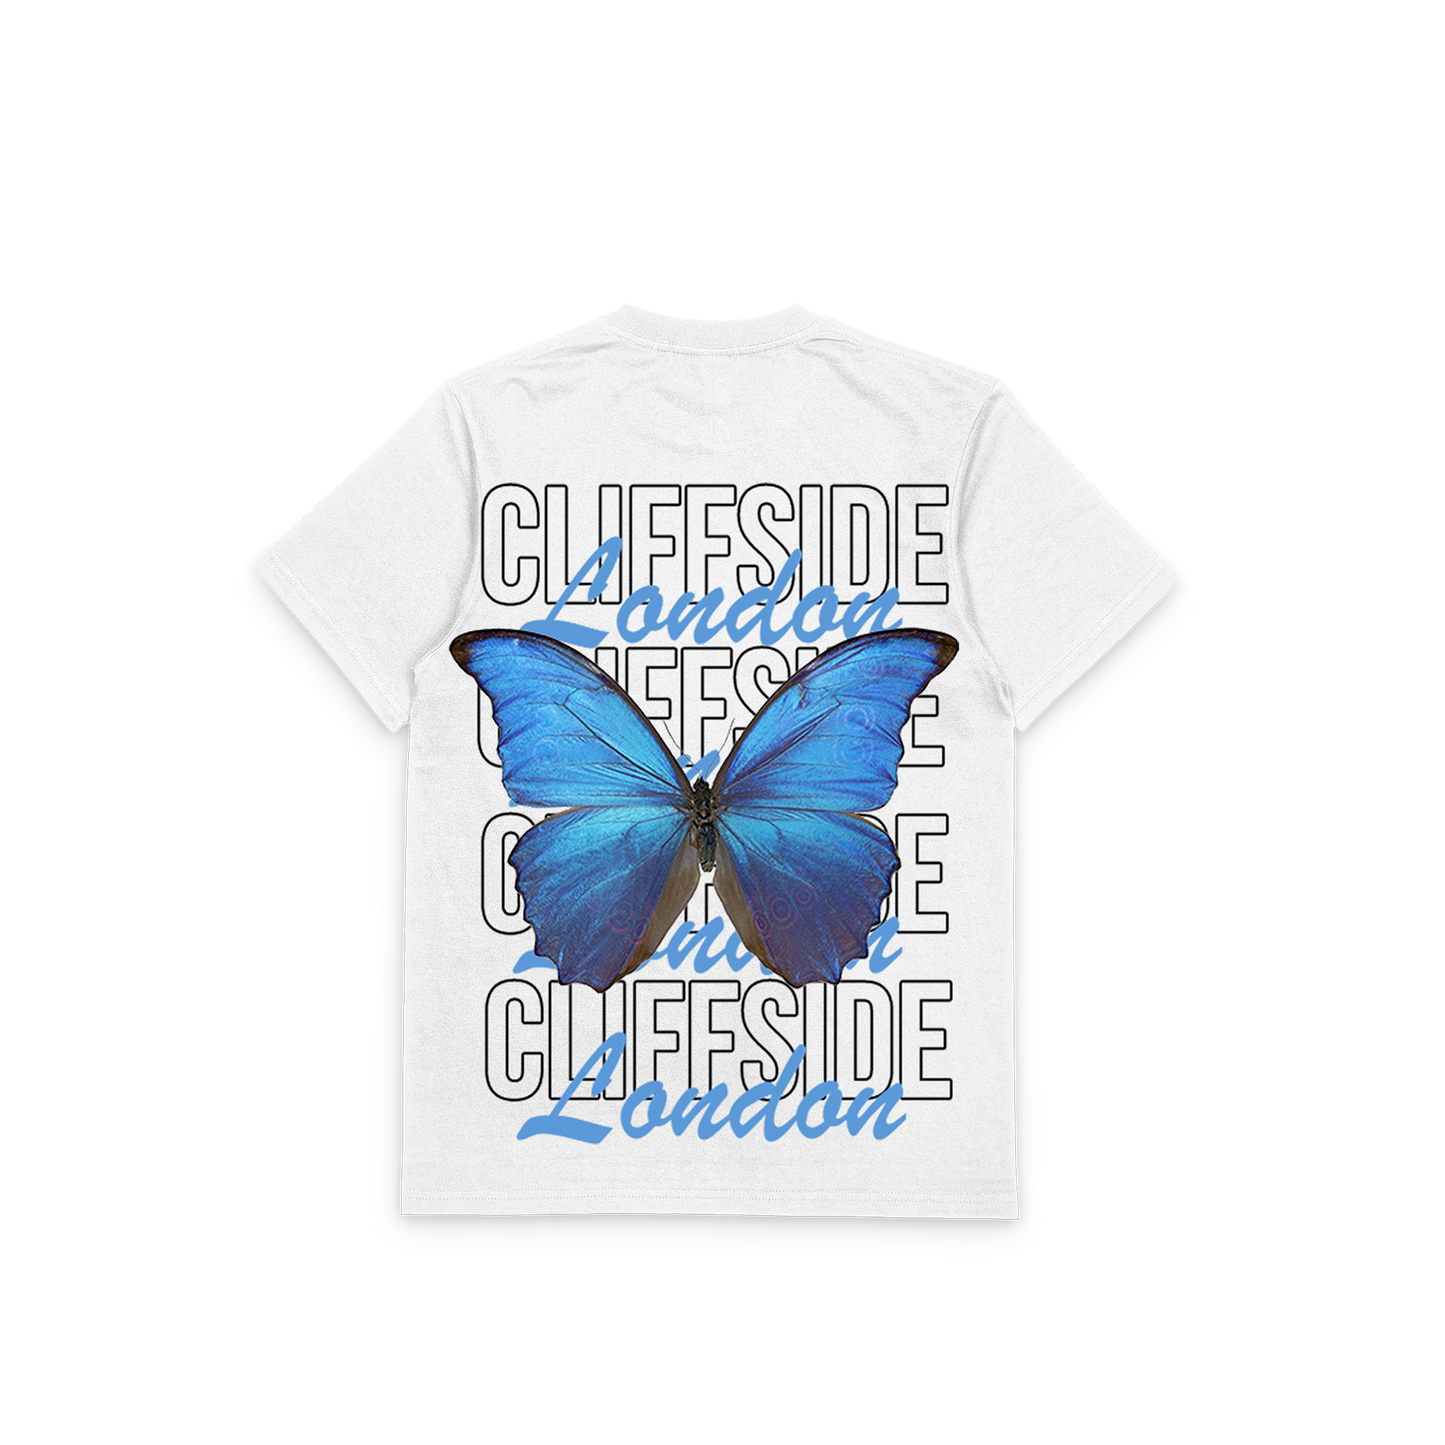 The CliffSide “🦋 Butterfly” Premium White Tee